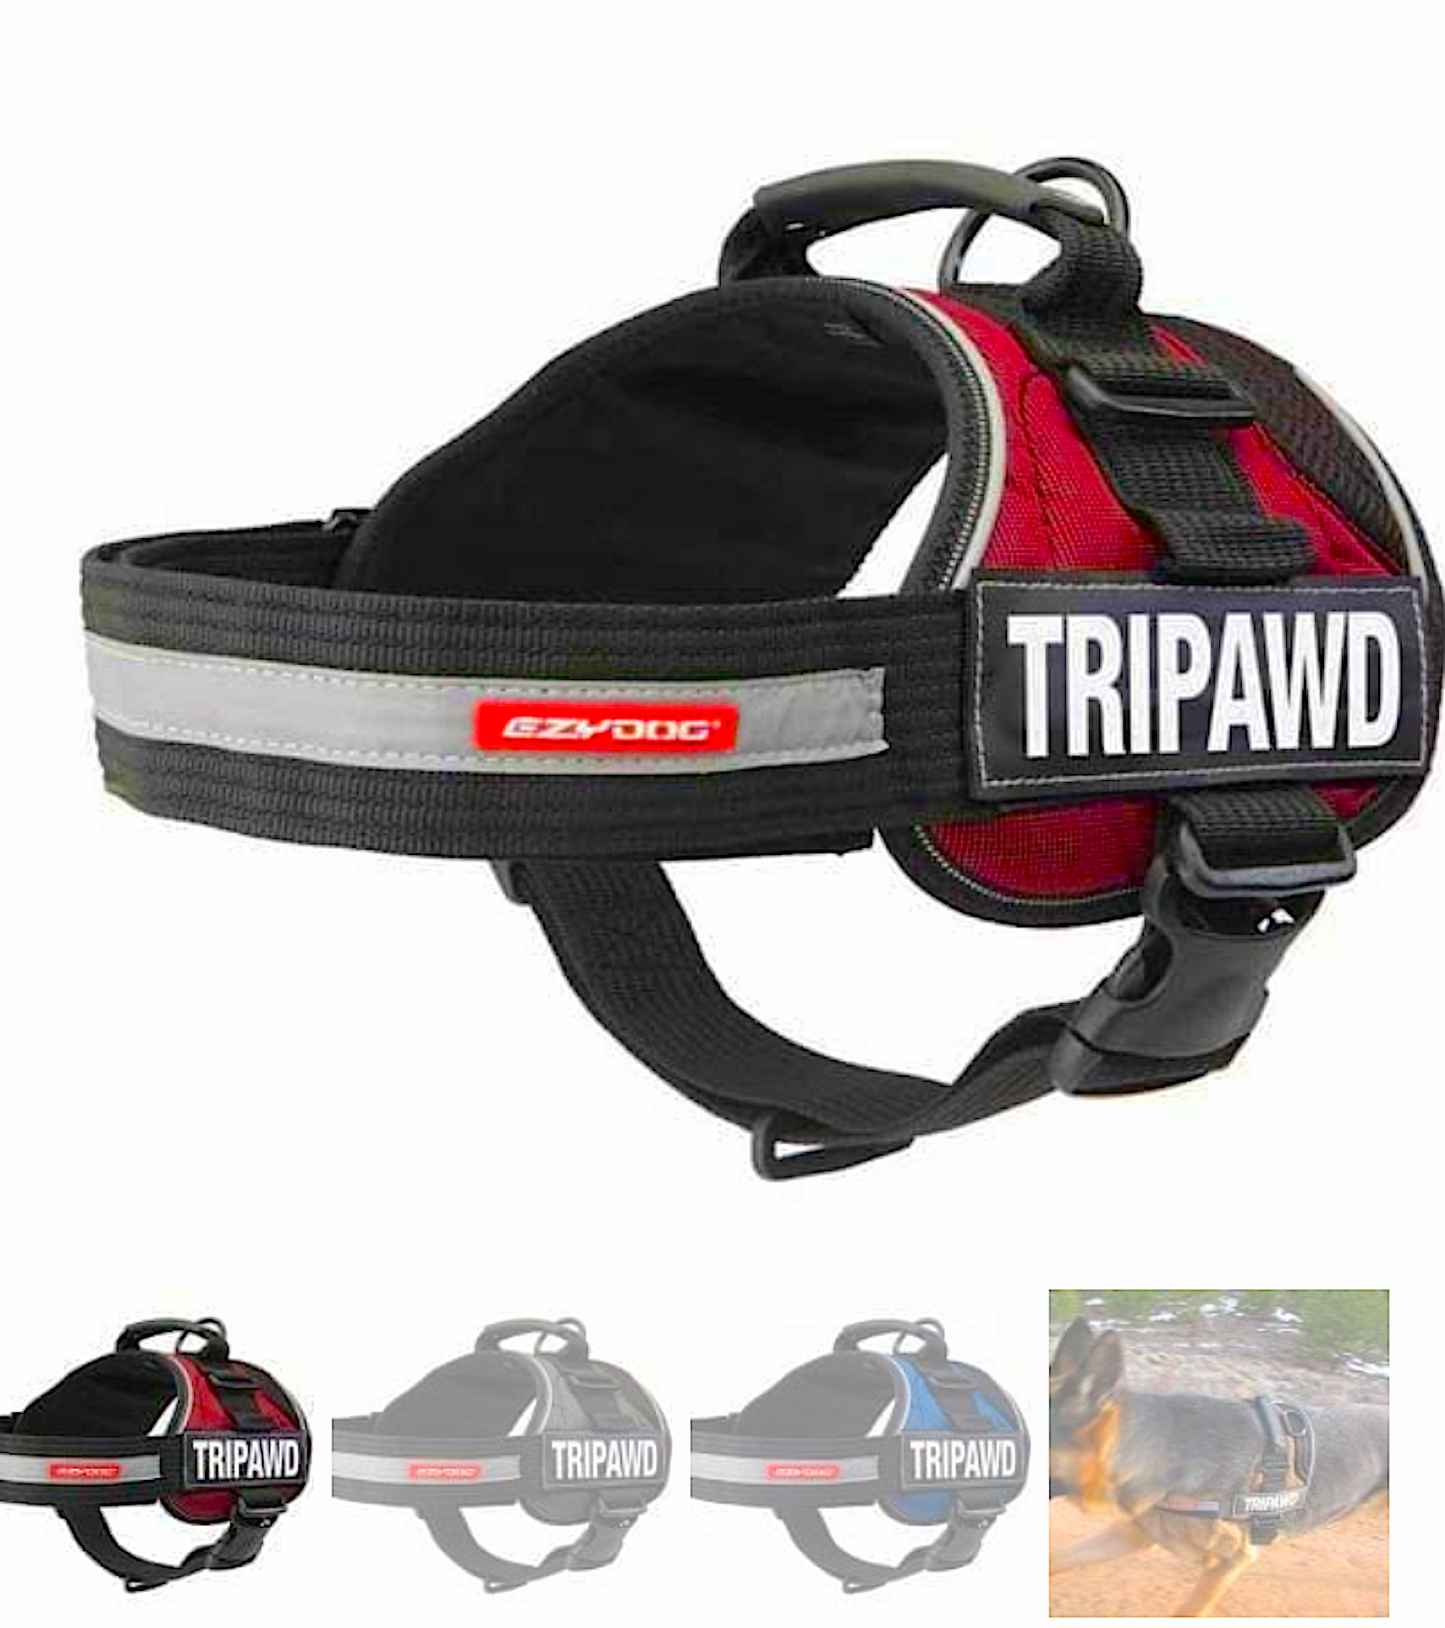 TRIPAWD CONVERT EZY DOG HARNESS: with easy application and quick-connect straps